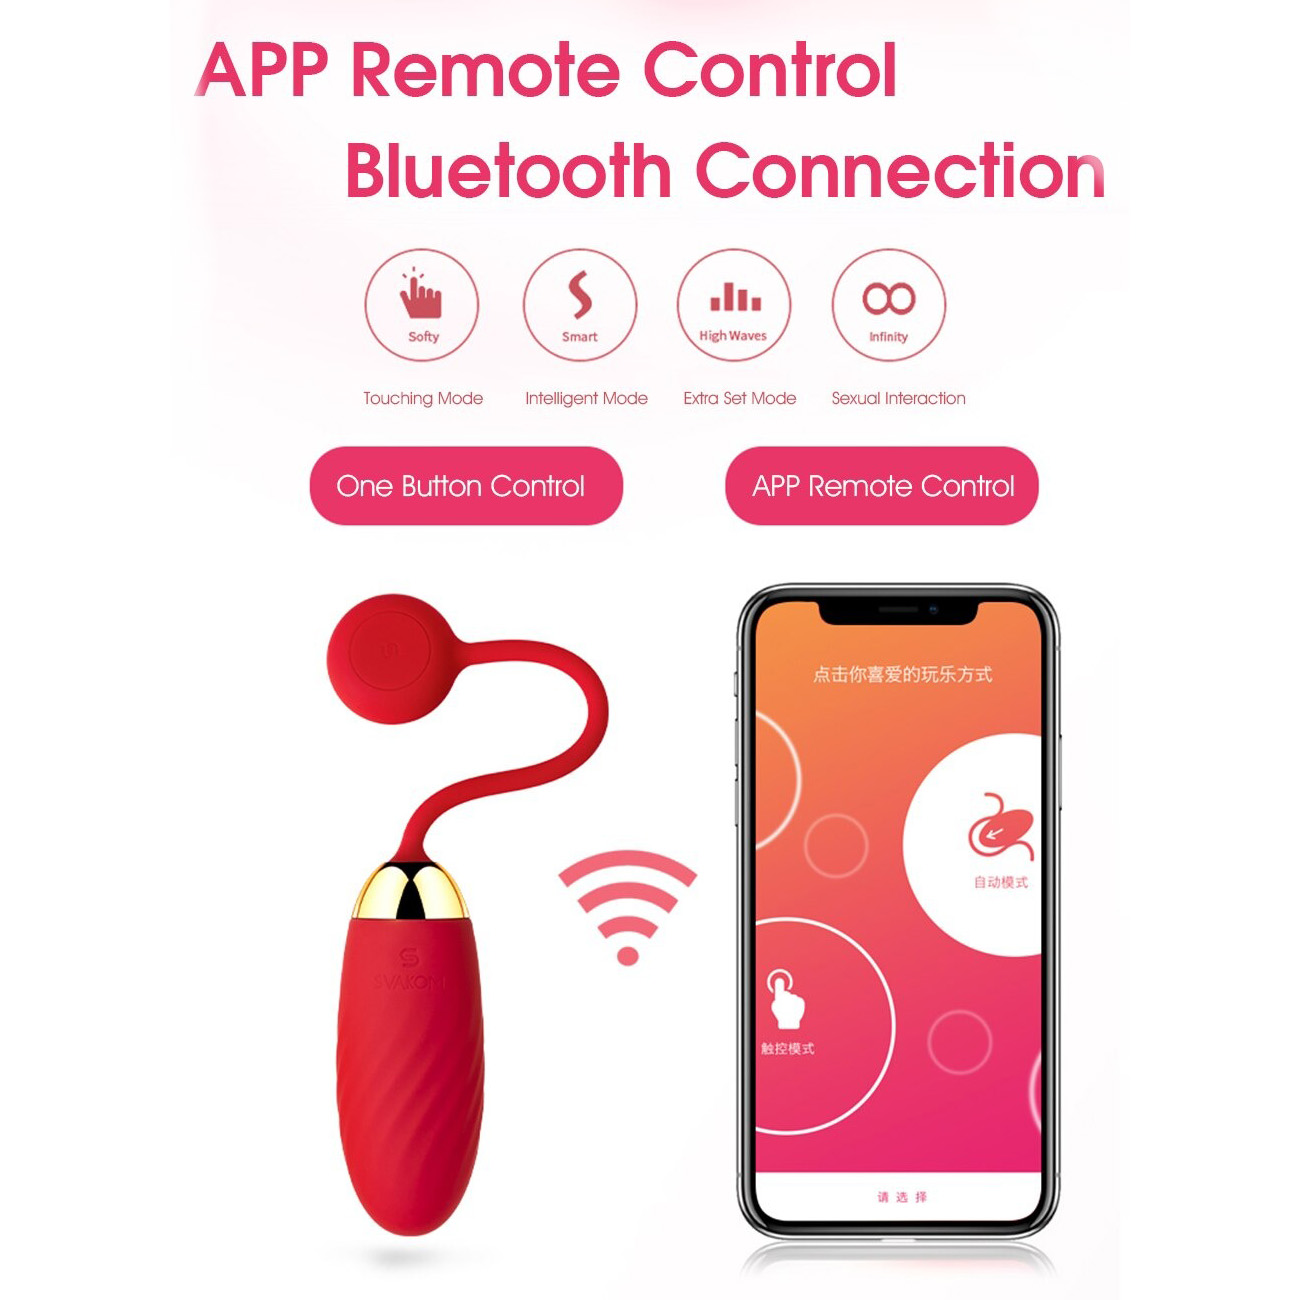 Bluetooth APP Remote Control Bullet Vibrator / Erotic Silicone Vaginal Ball Vibrating Toys for Women - EVE's SECRETS